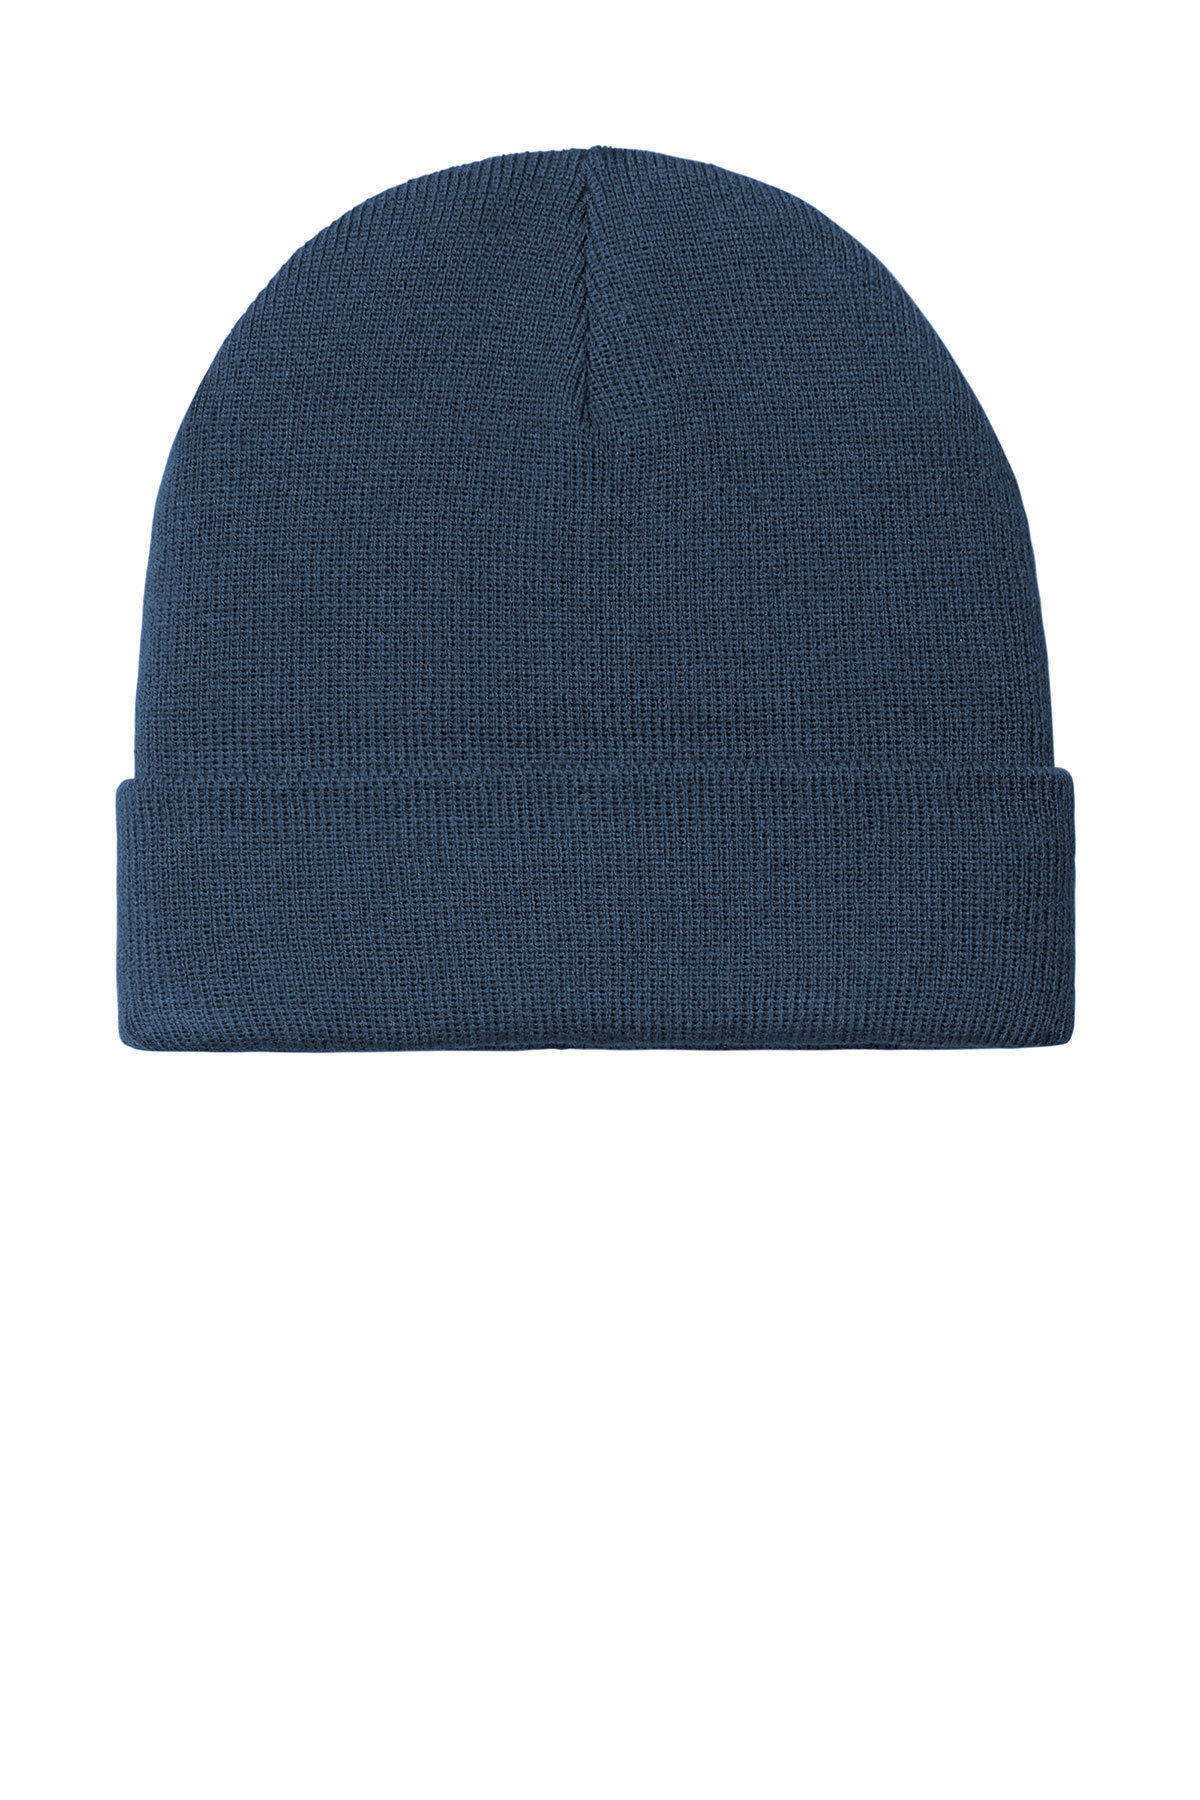 Port Authority Knit Cuff Beanie | Product | SanMar